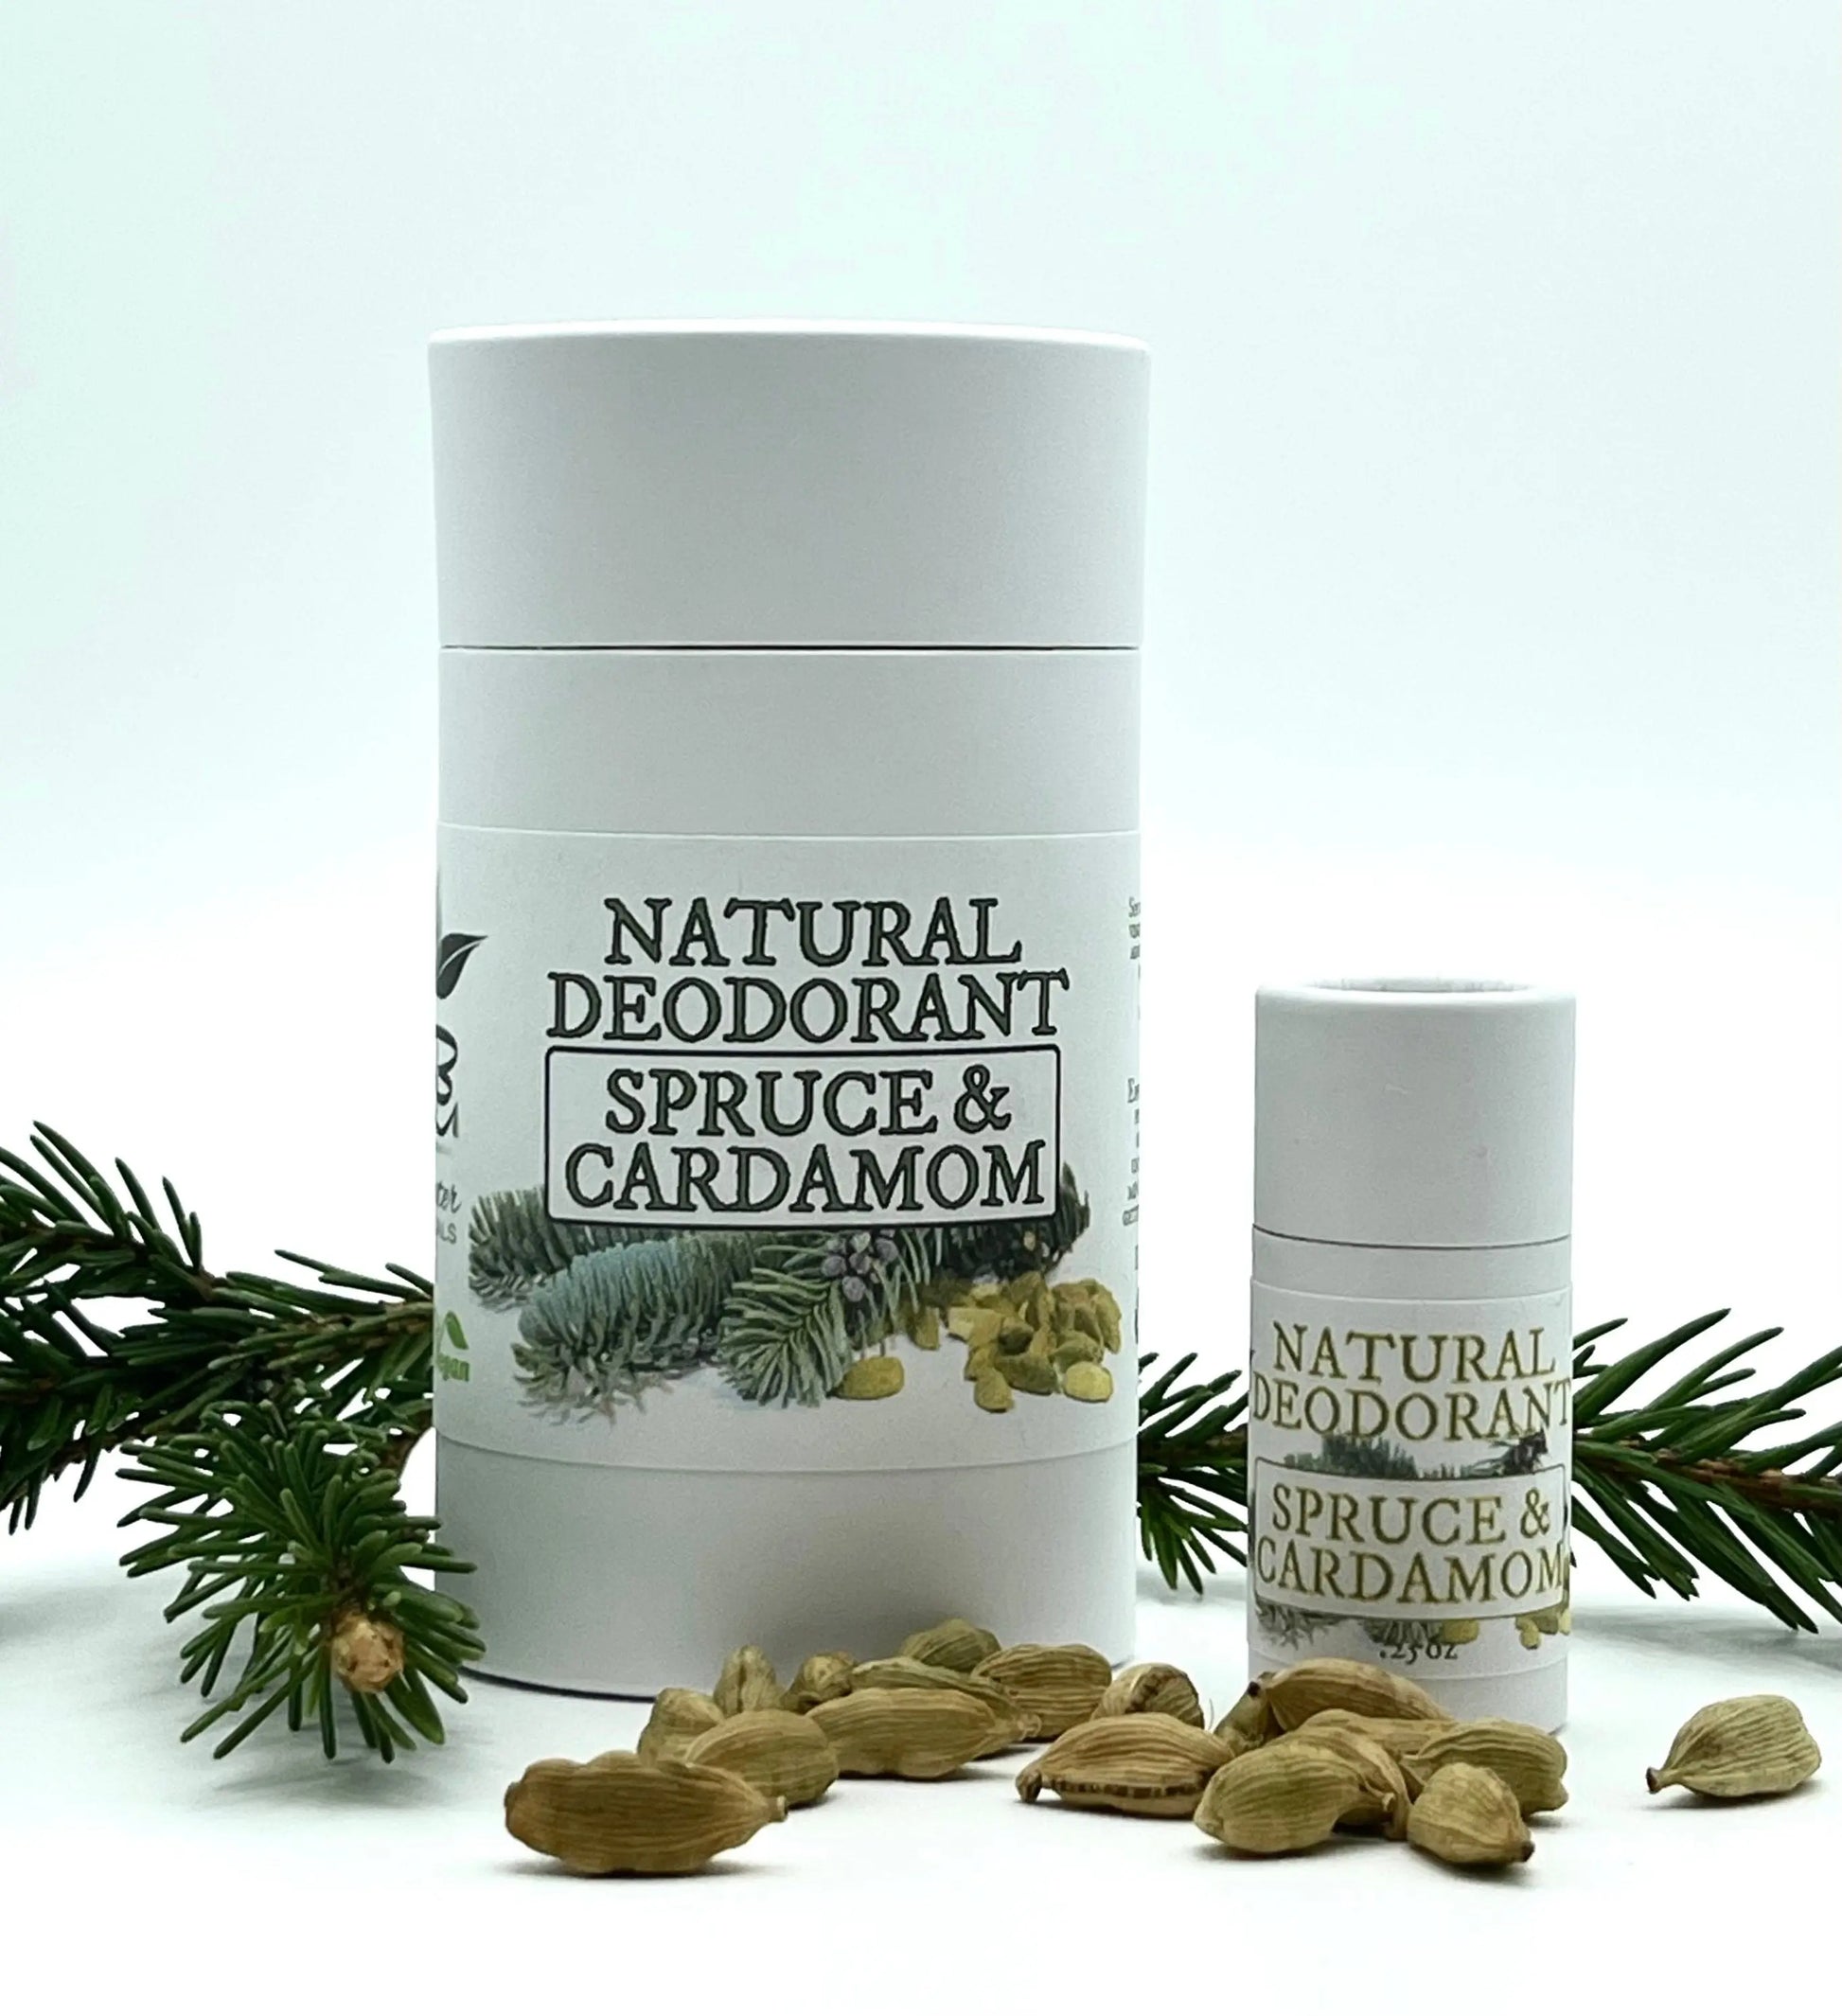 Sustainable Natural Deodorant That Works